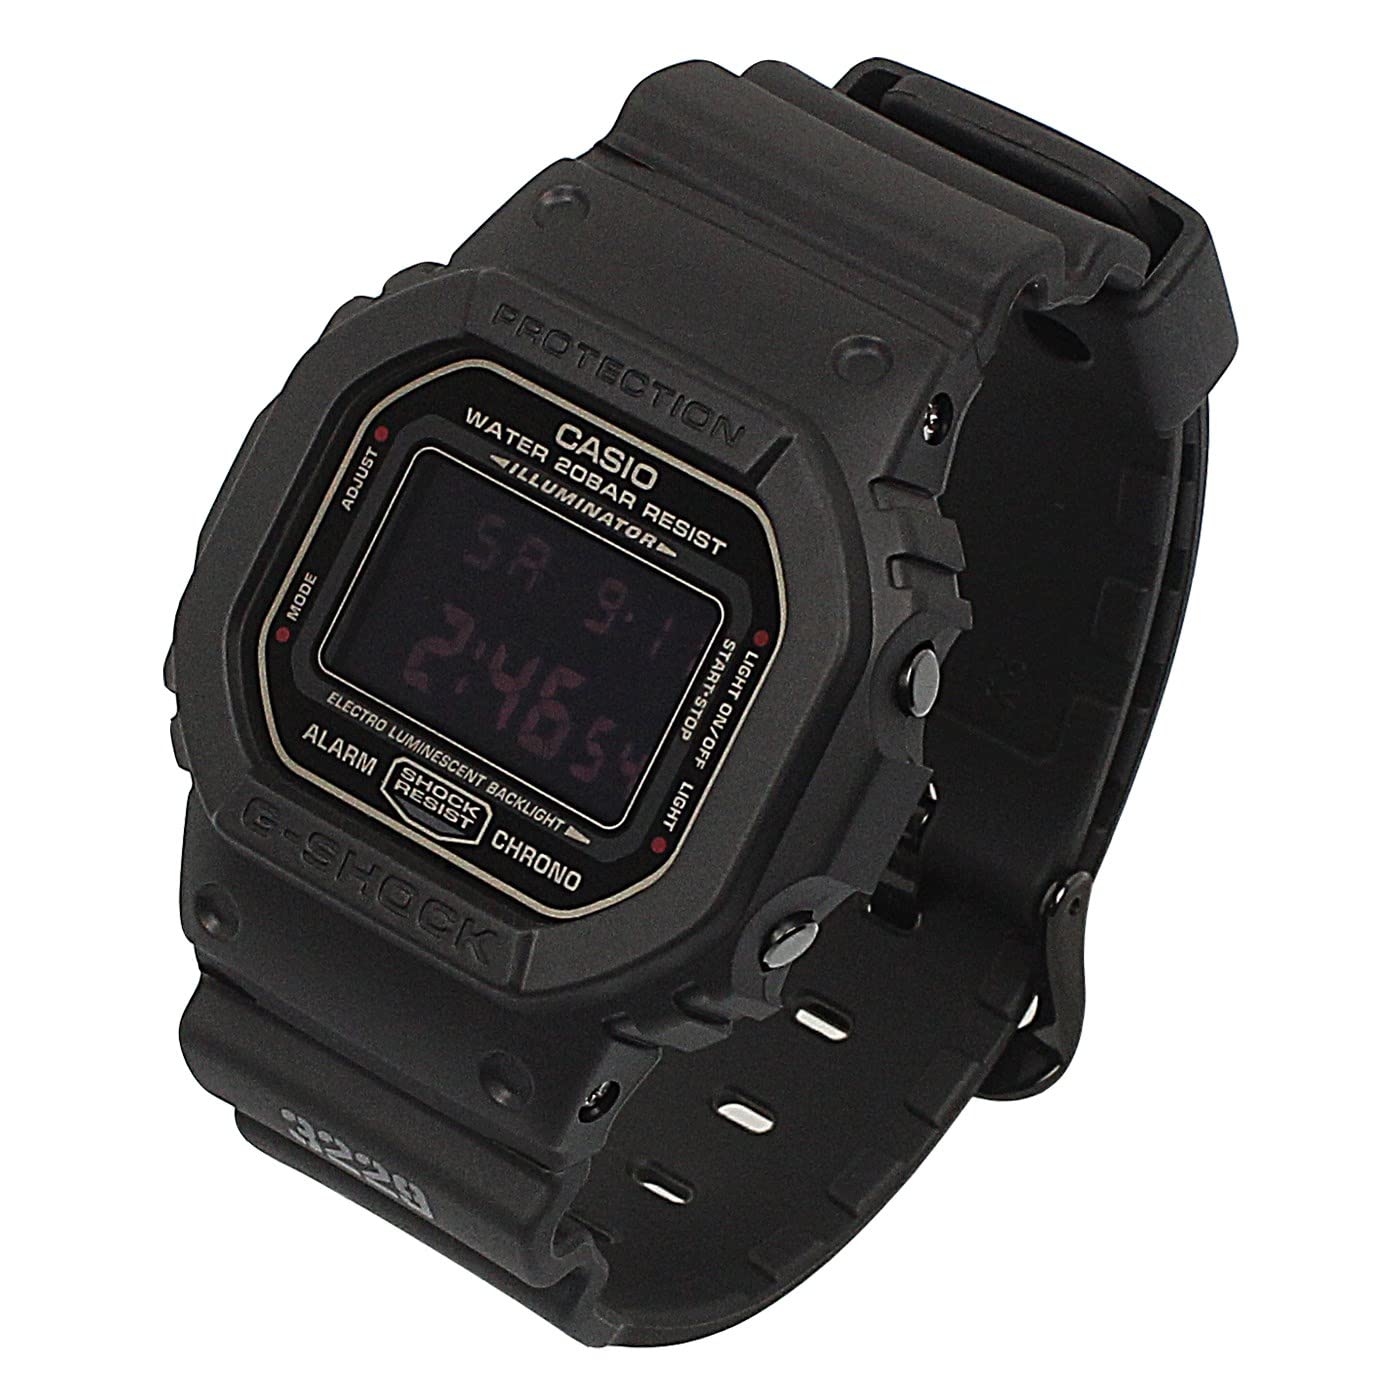 Casio G-Shock Men's Classic Collection watch #DW-5600MS-1